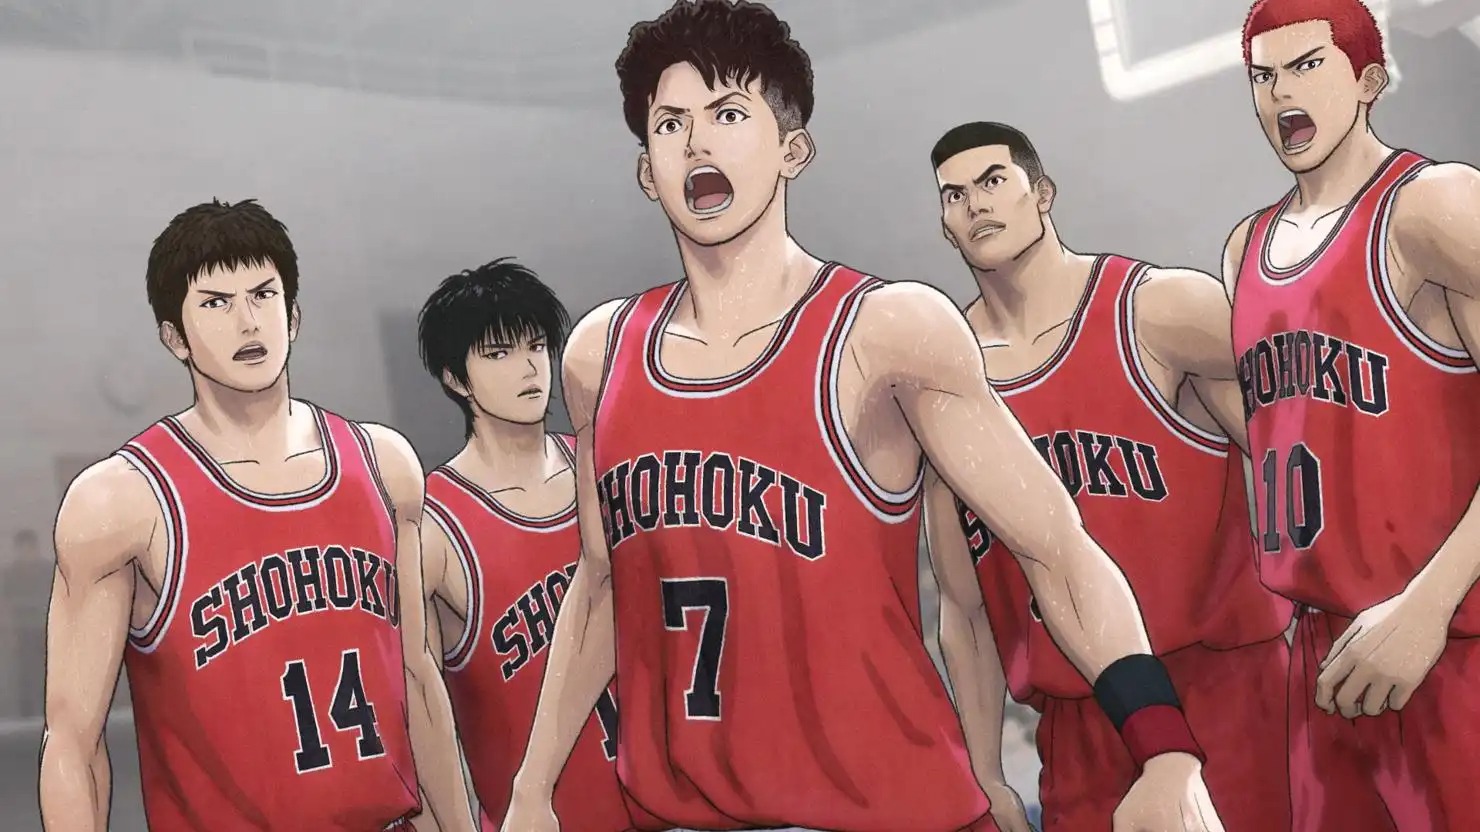 THE FIRST SLAM DUNK Anime Film Travels Past Your Name to Be the Top Japanese Movie in South Korea of All Time